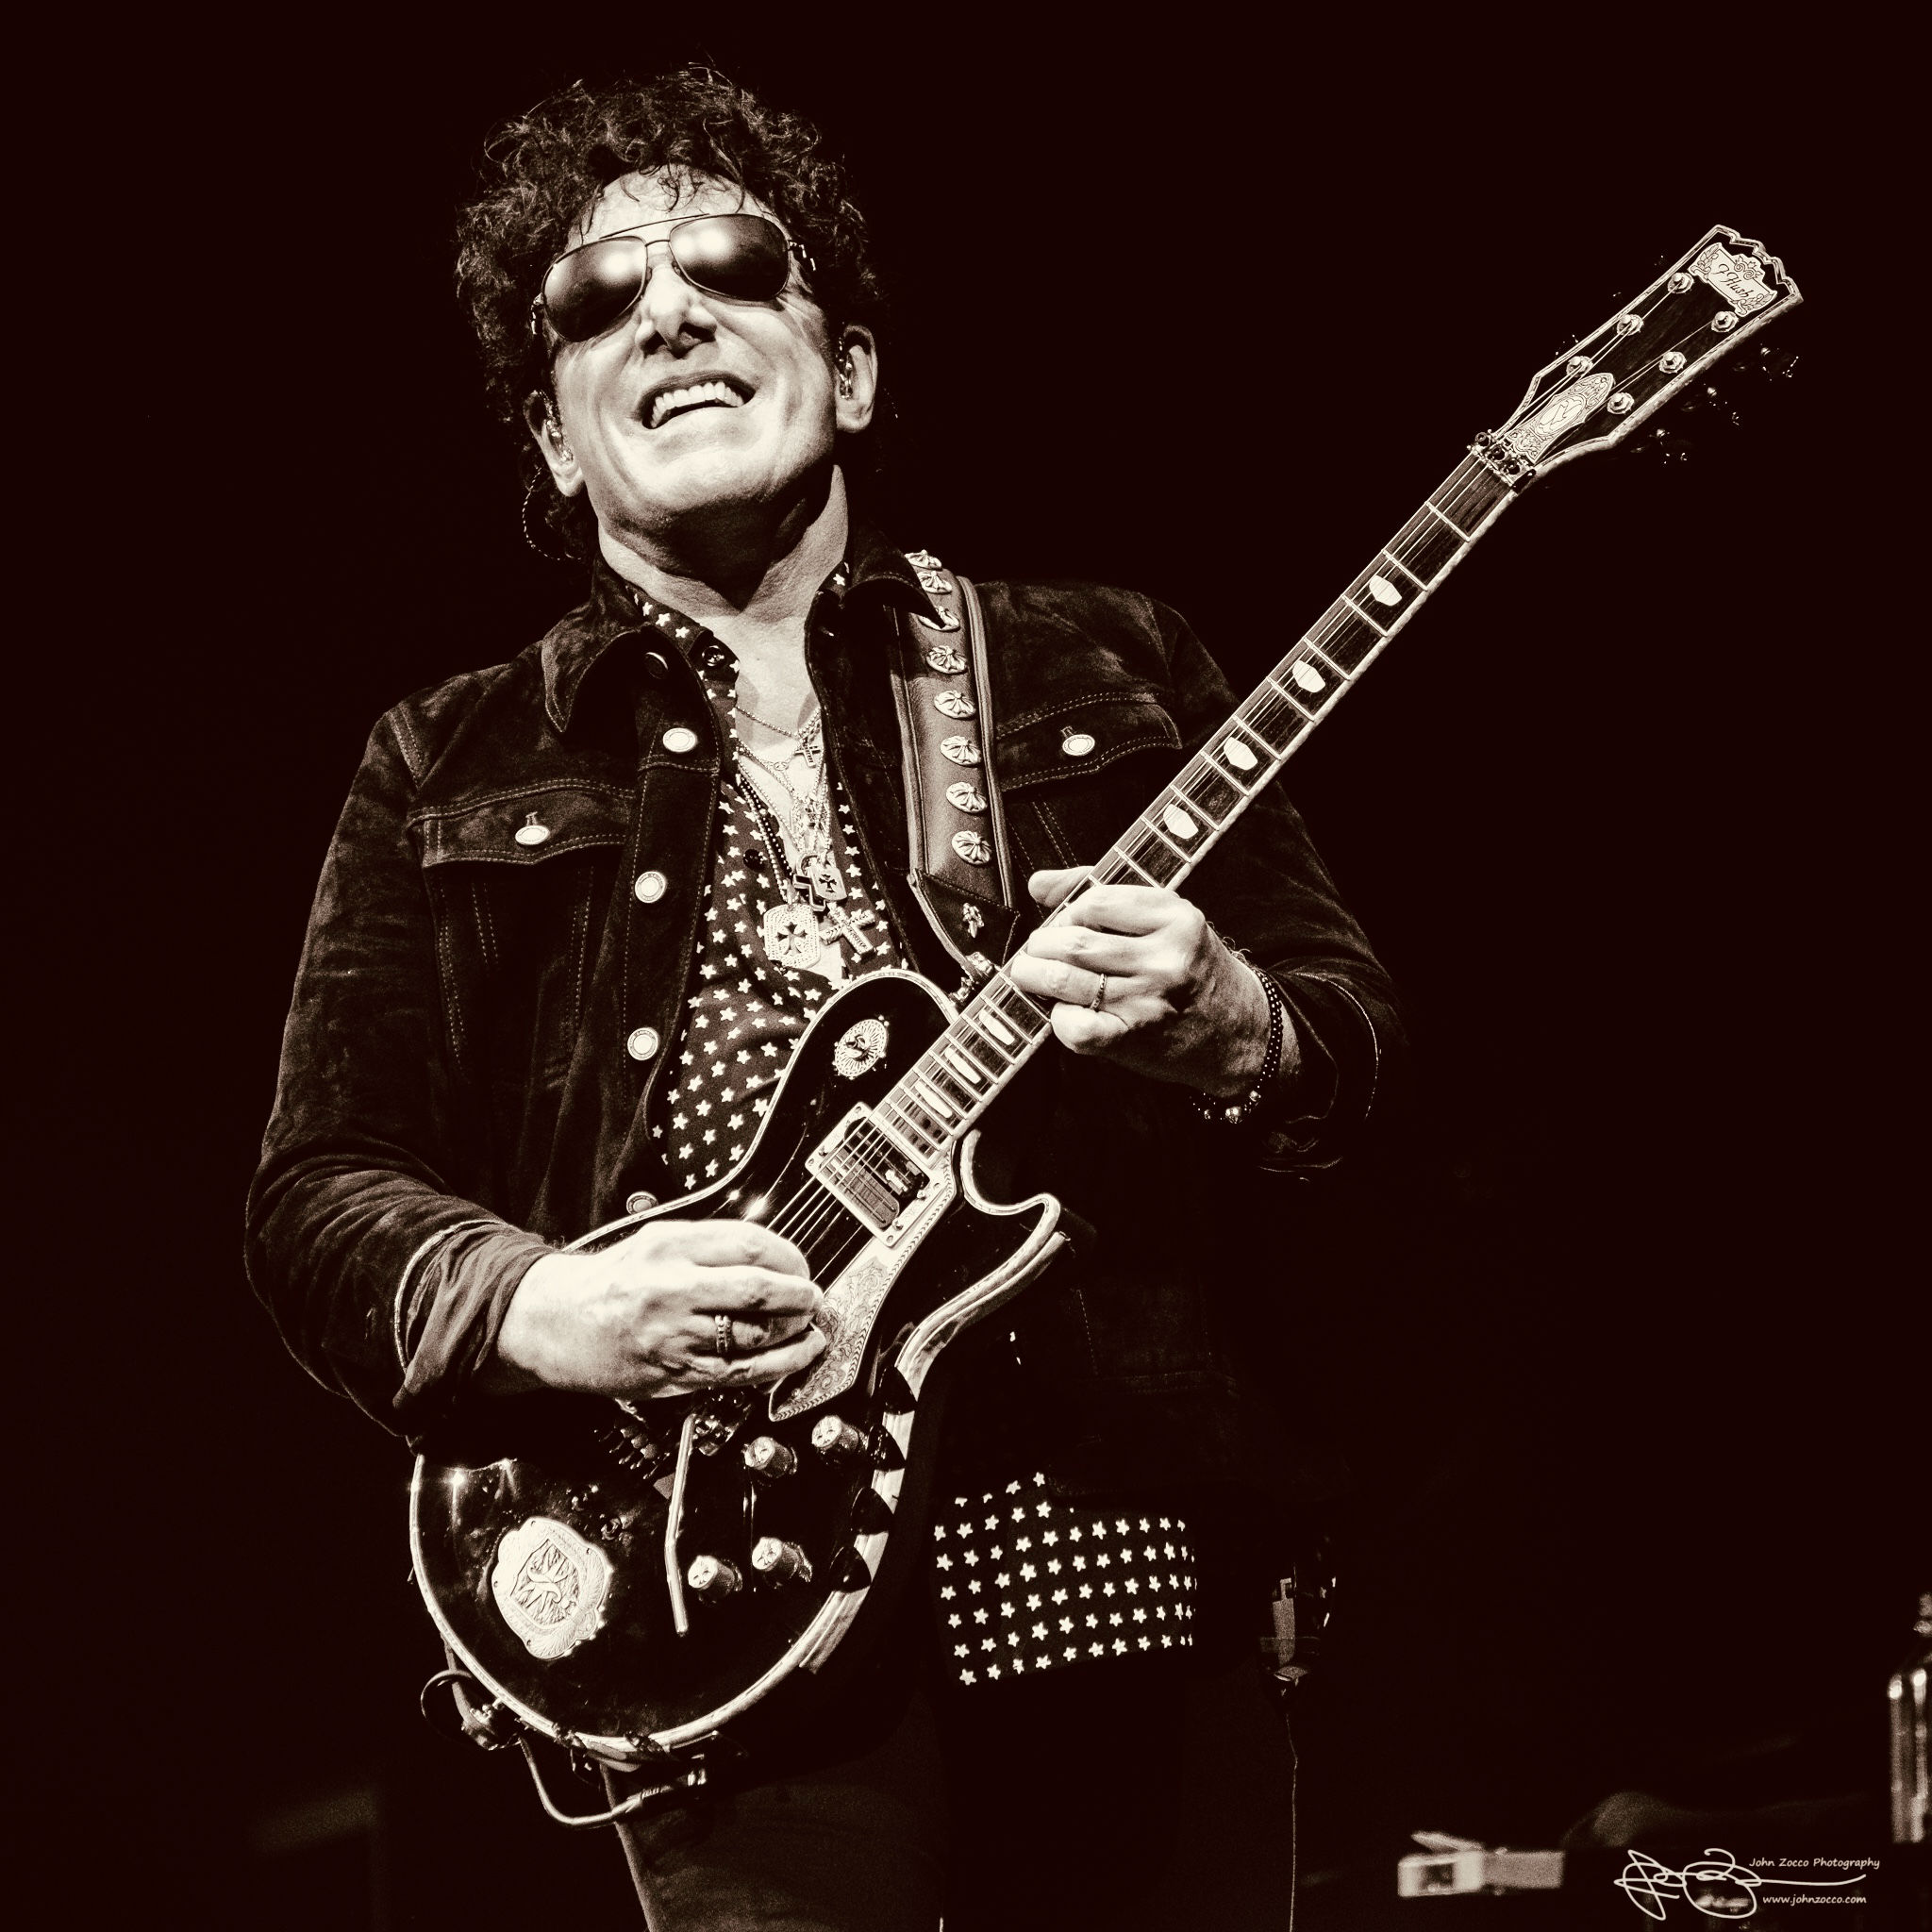 Neal Schon Man in Black Plays Guitar with a Dark backdrop